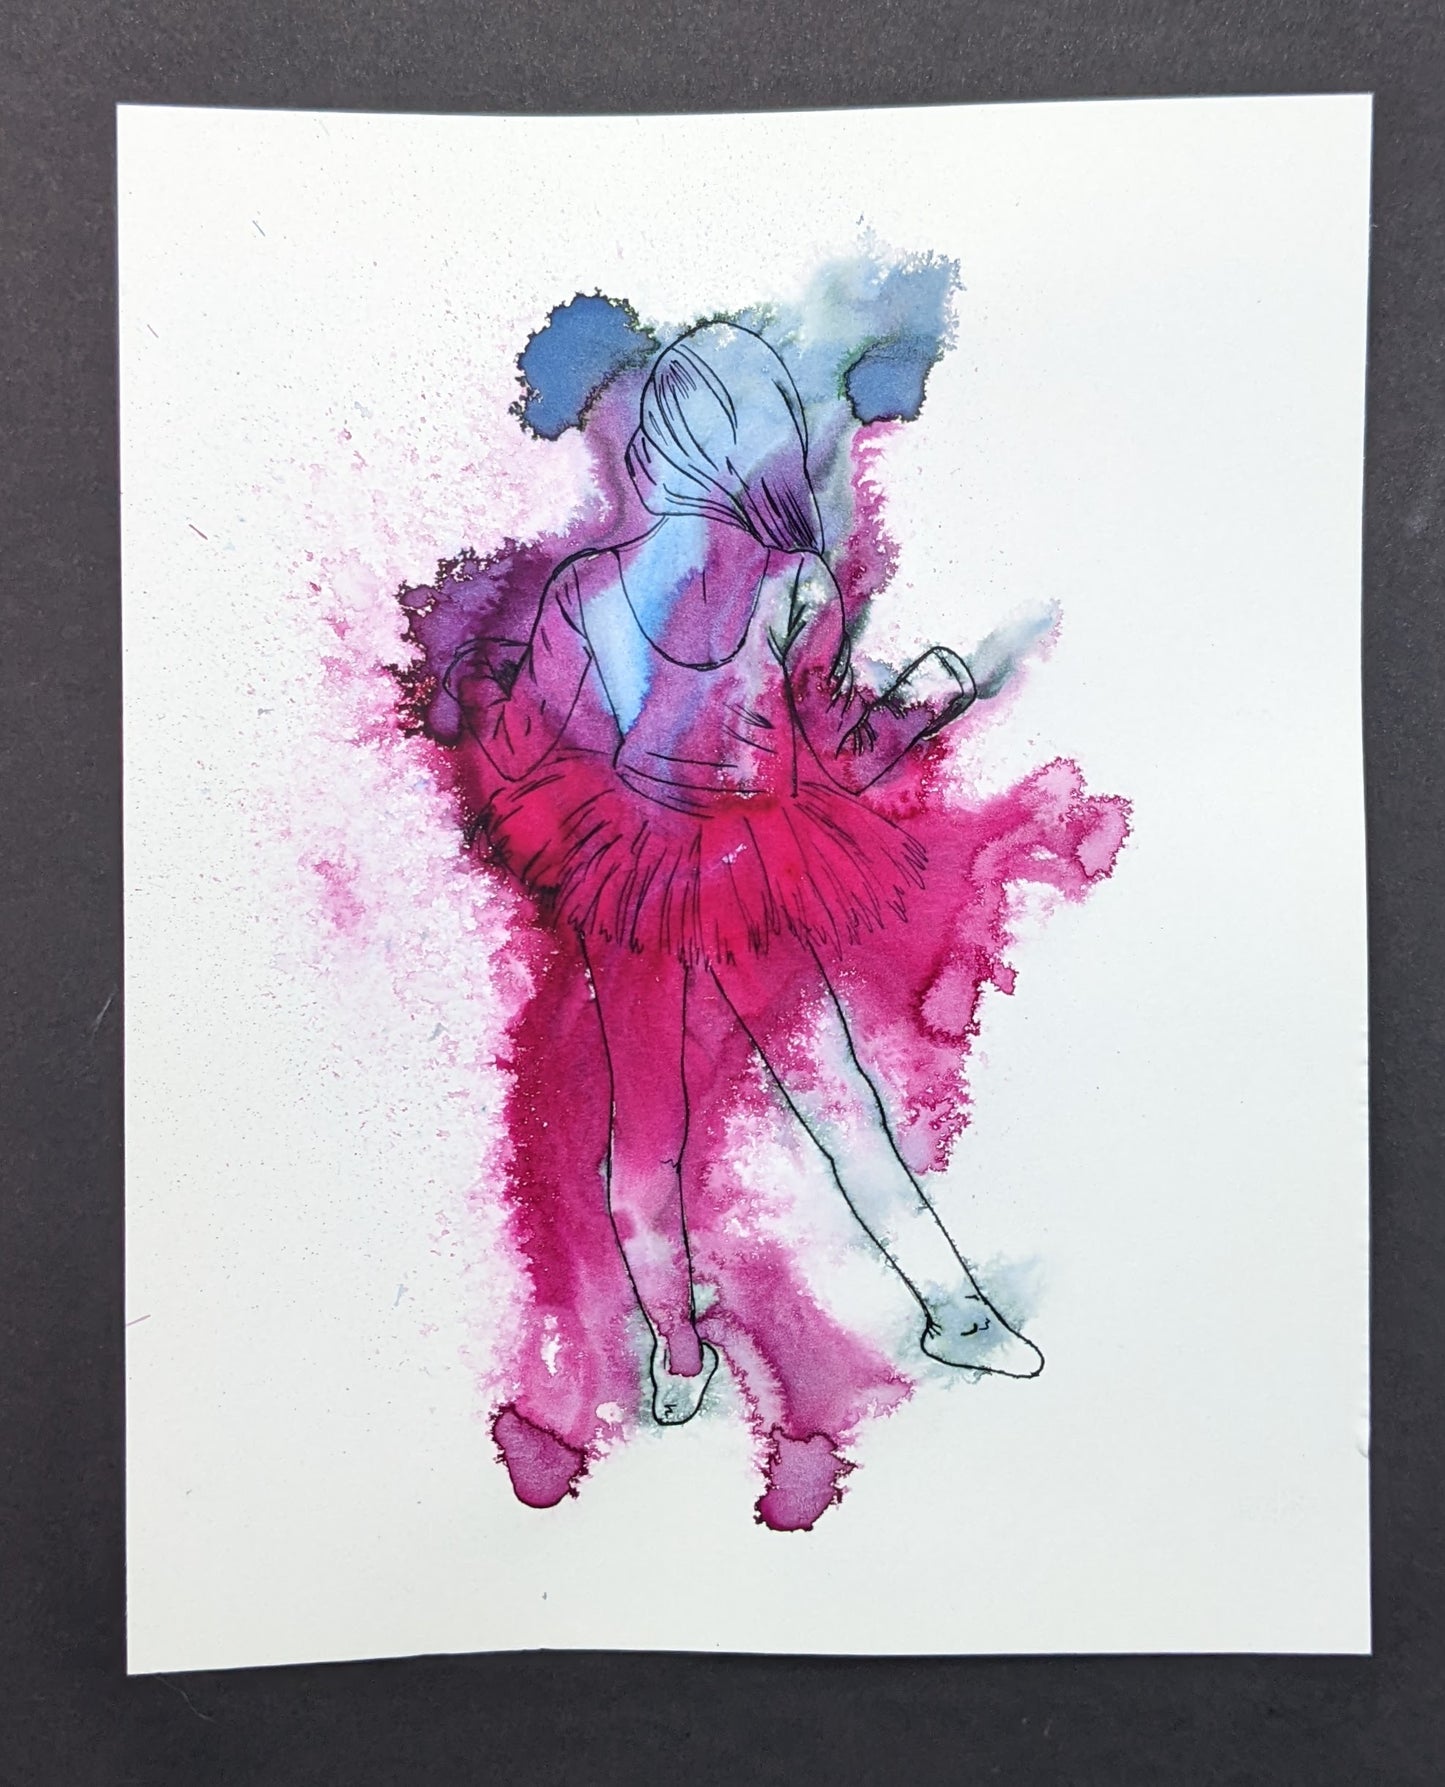 Inner Child Collection, beautiful simple original artwork, pink ballet dancer, dancing child image, contemporary fine art ink painting.